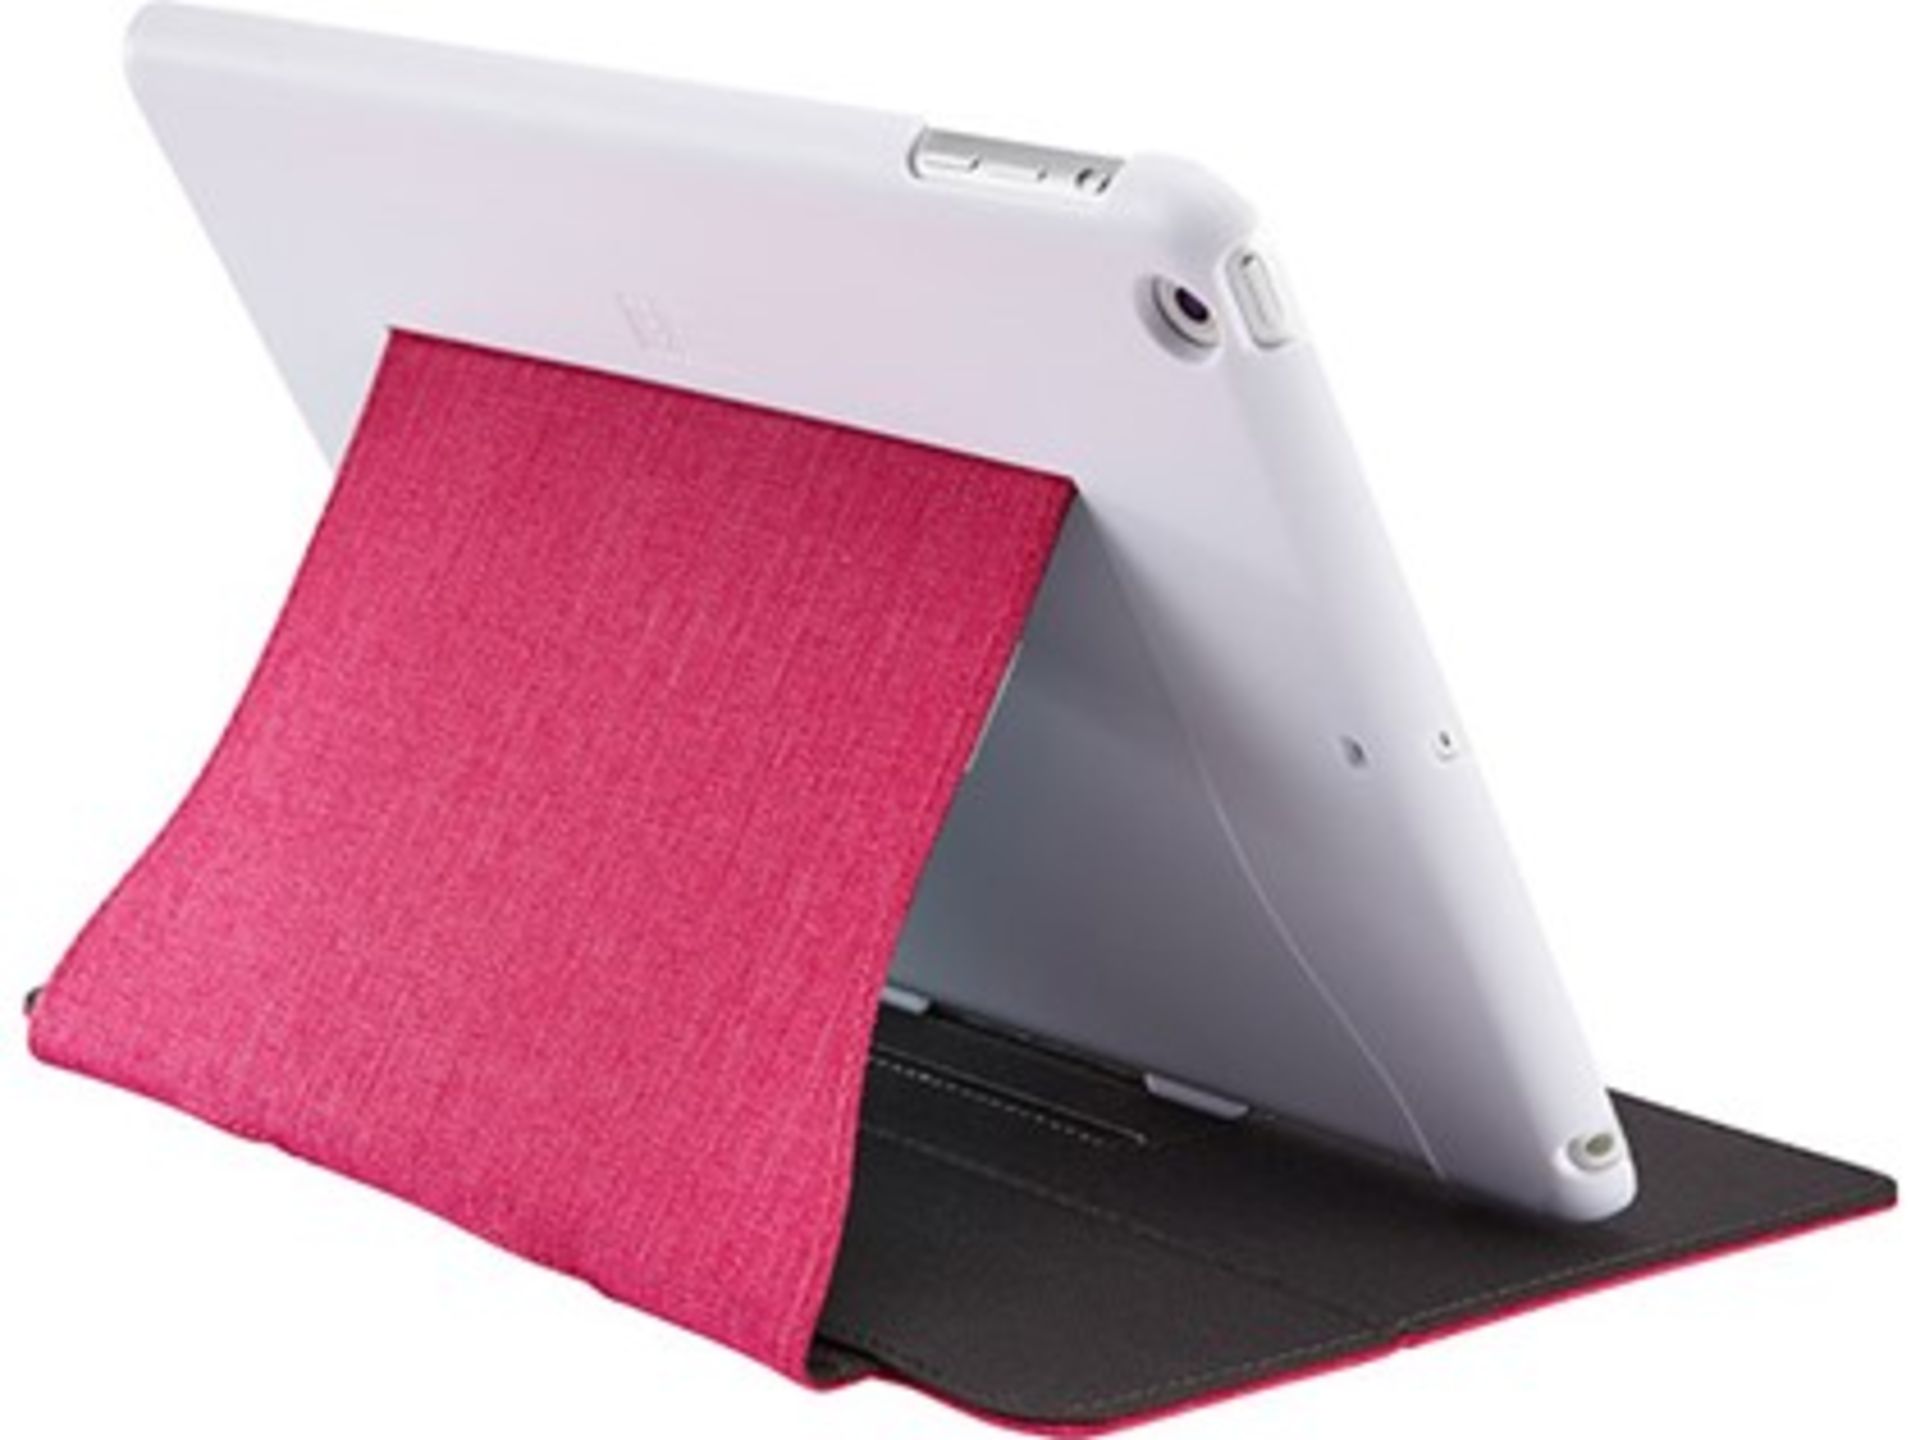 1457 X BRAND NEW CASE LOGIC FSI1095P PHLOX PINK SNAPVIEW CASES FOR IPAD AIR AND IPAD AIR 2 - Image 2 of 4